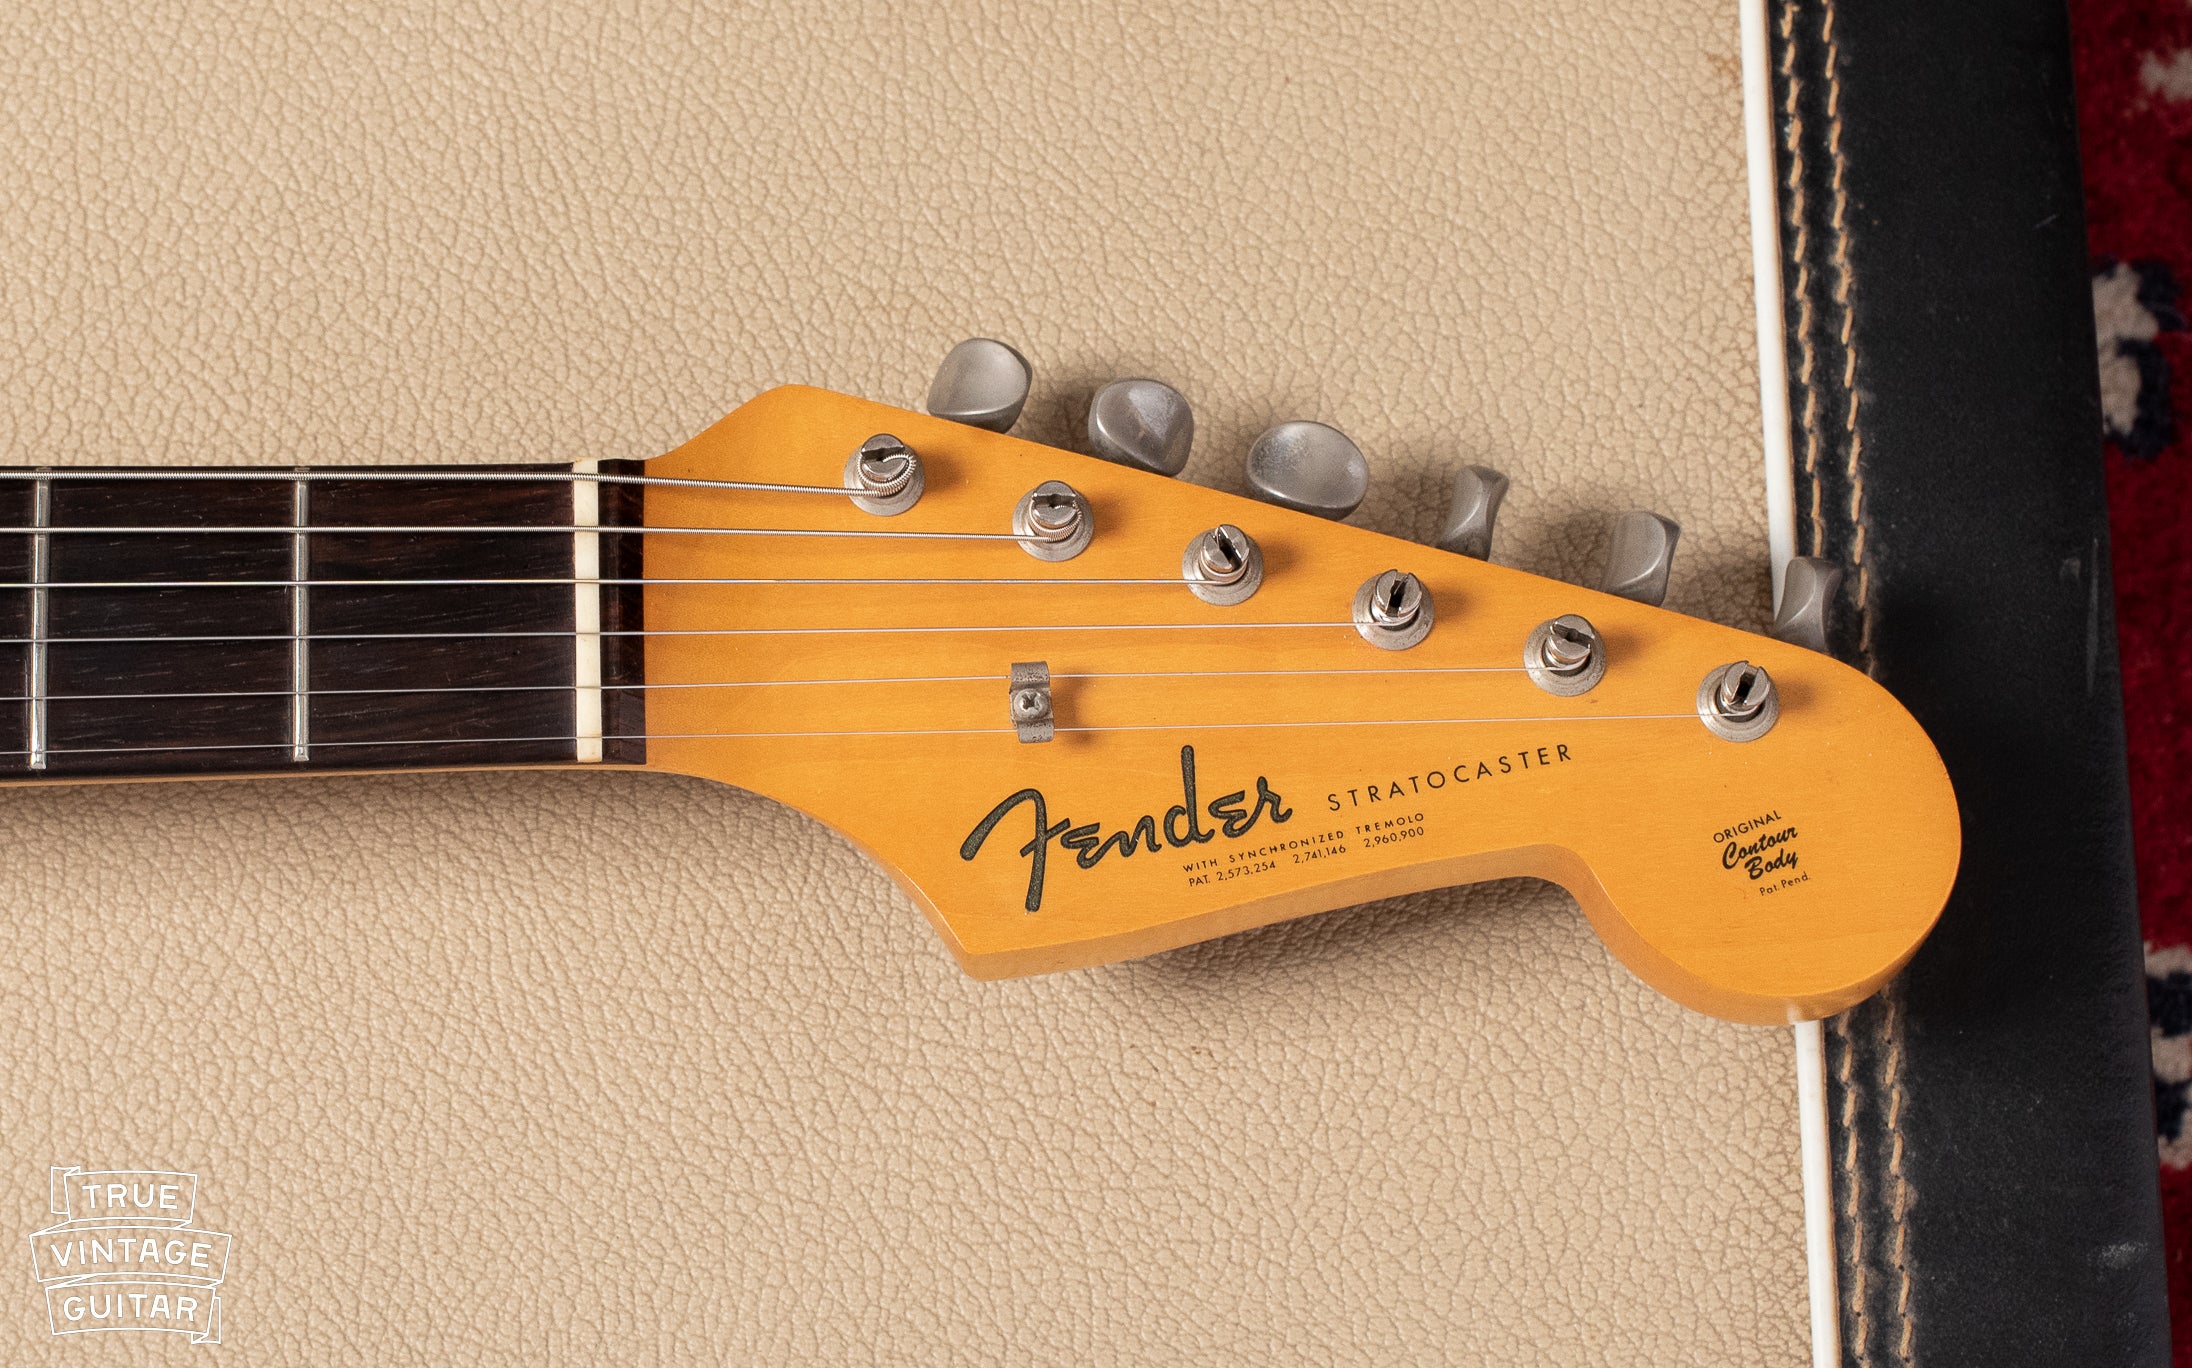 Spaghetti logo with three patent numbers on 1964 Stratocaster